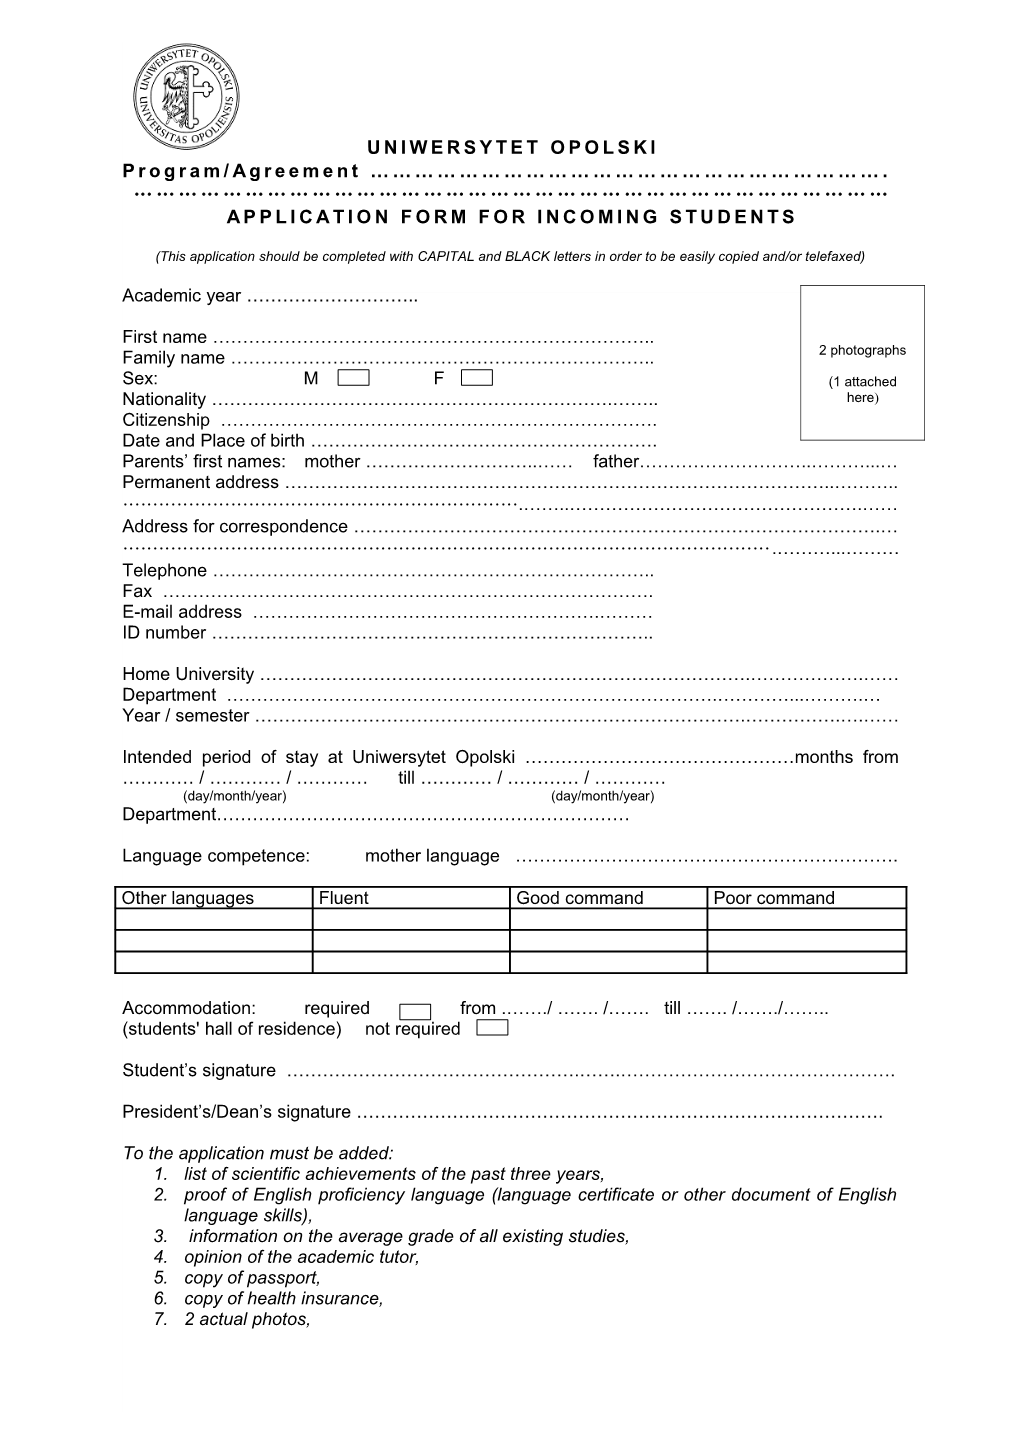 Application Form for Incoming Students